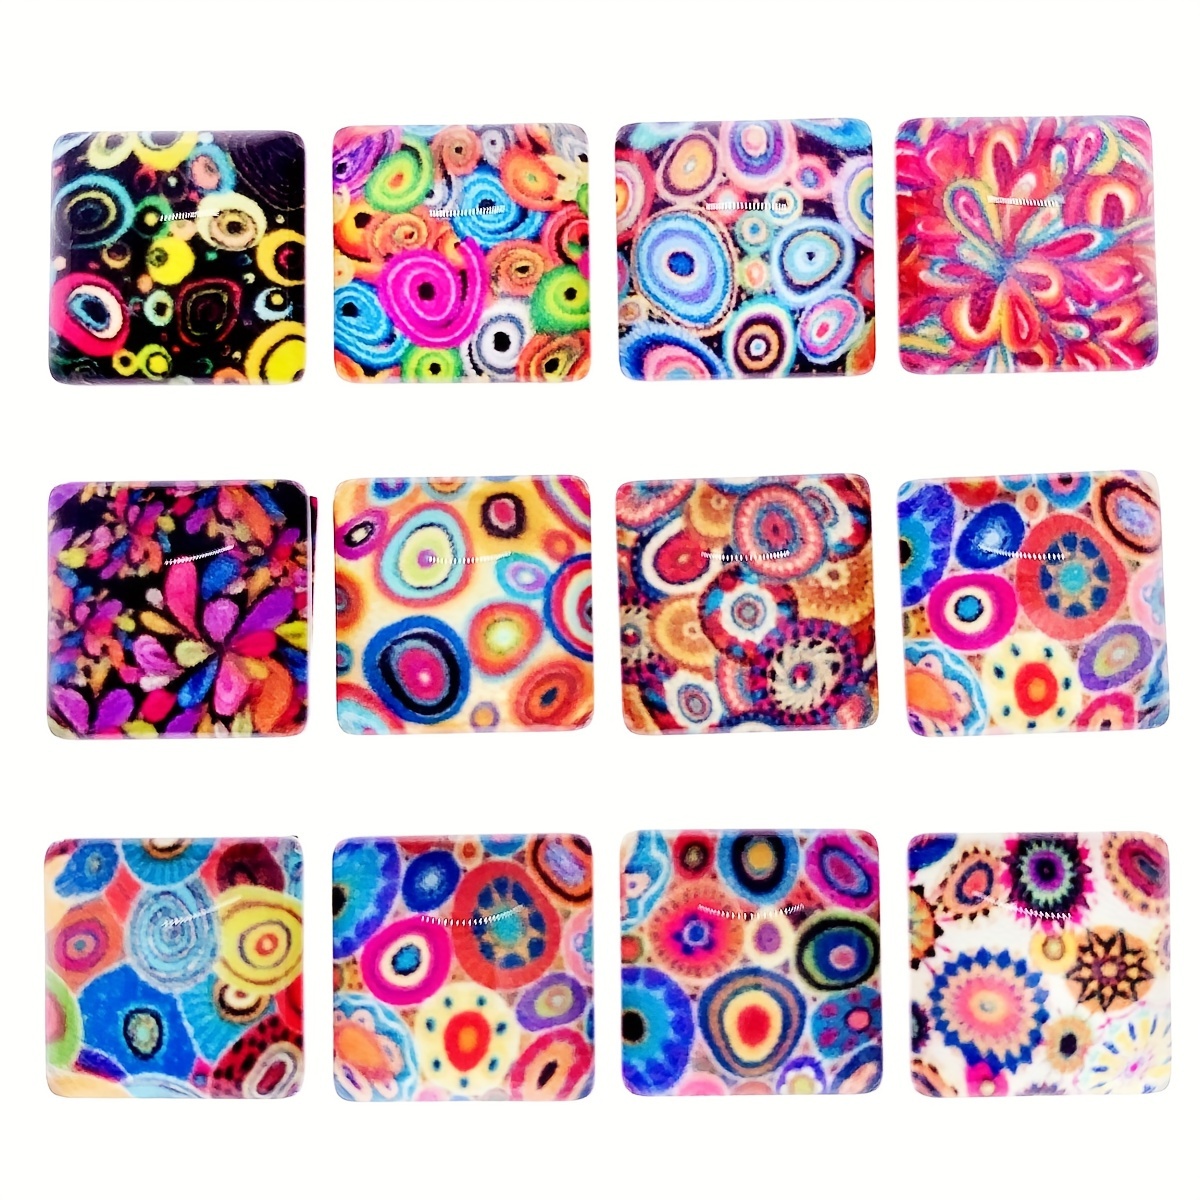 

30pcs Mixed Designs Square Glass Cabochon Beads, 0.47x0.47inch/1.2x1.2cm, Colorful Mosaic Tiles For Diy Crafts, Jewelry Making Accessories